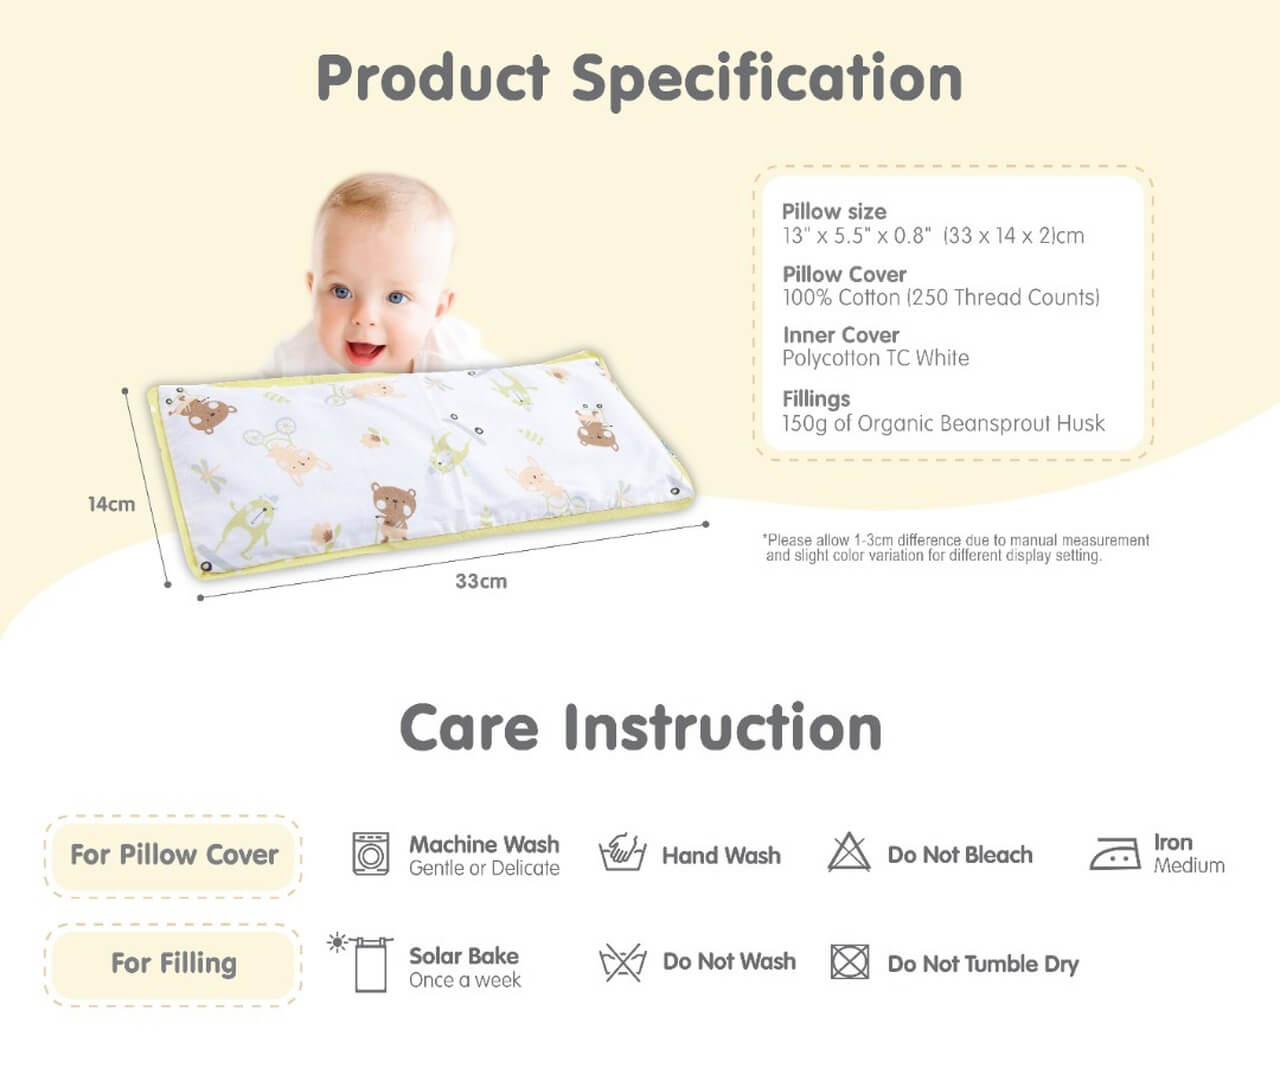 Babylove Organic Beansprout Husk Pillow Care Instruction